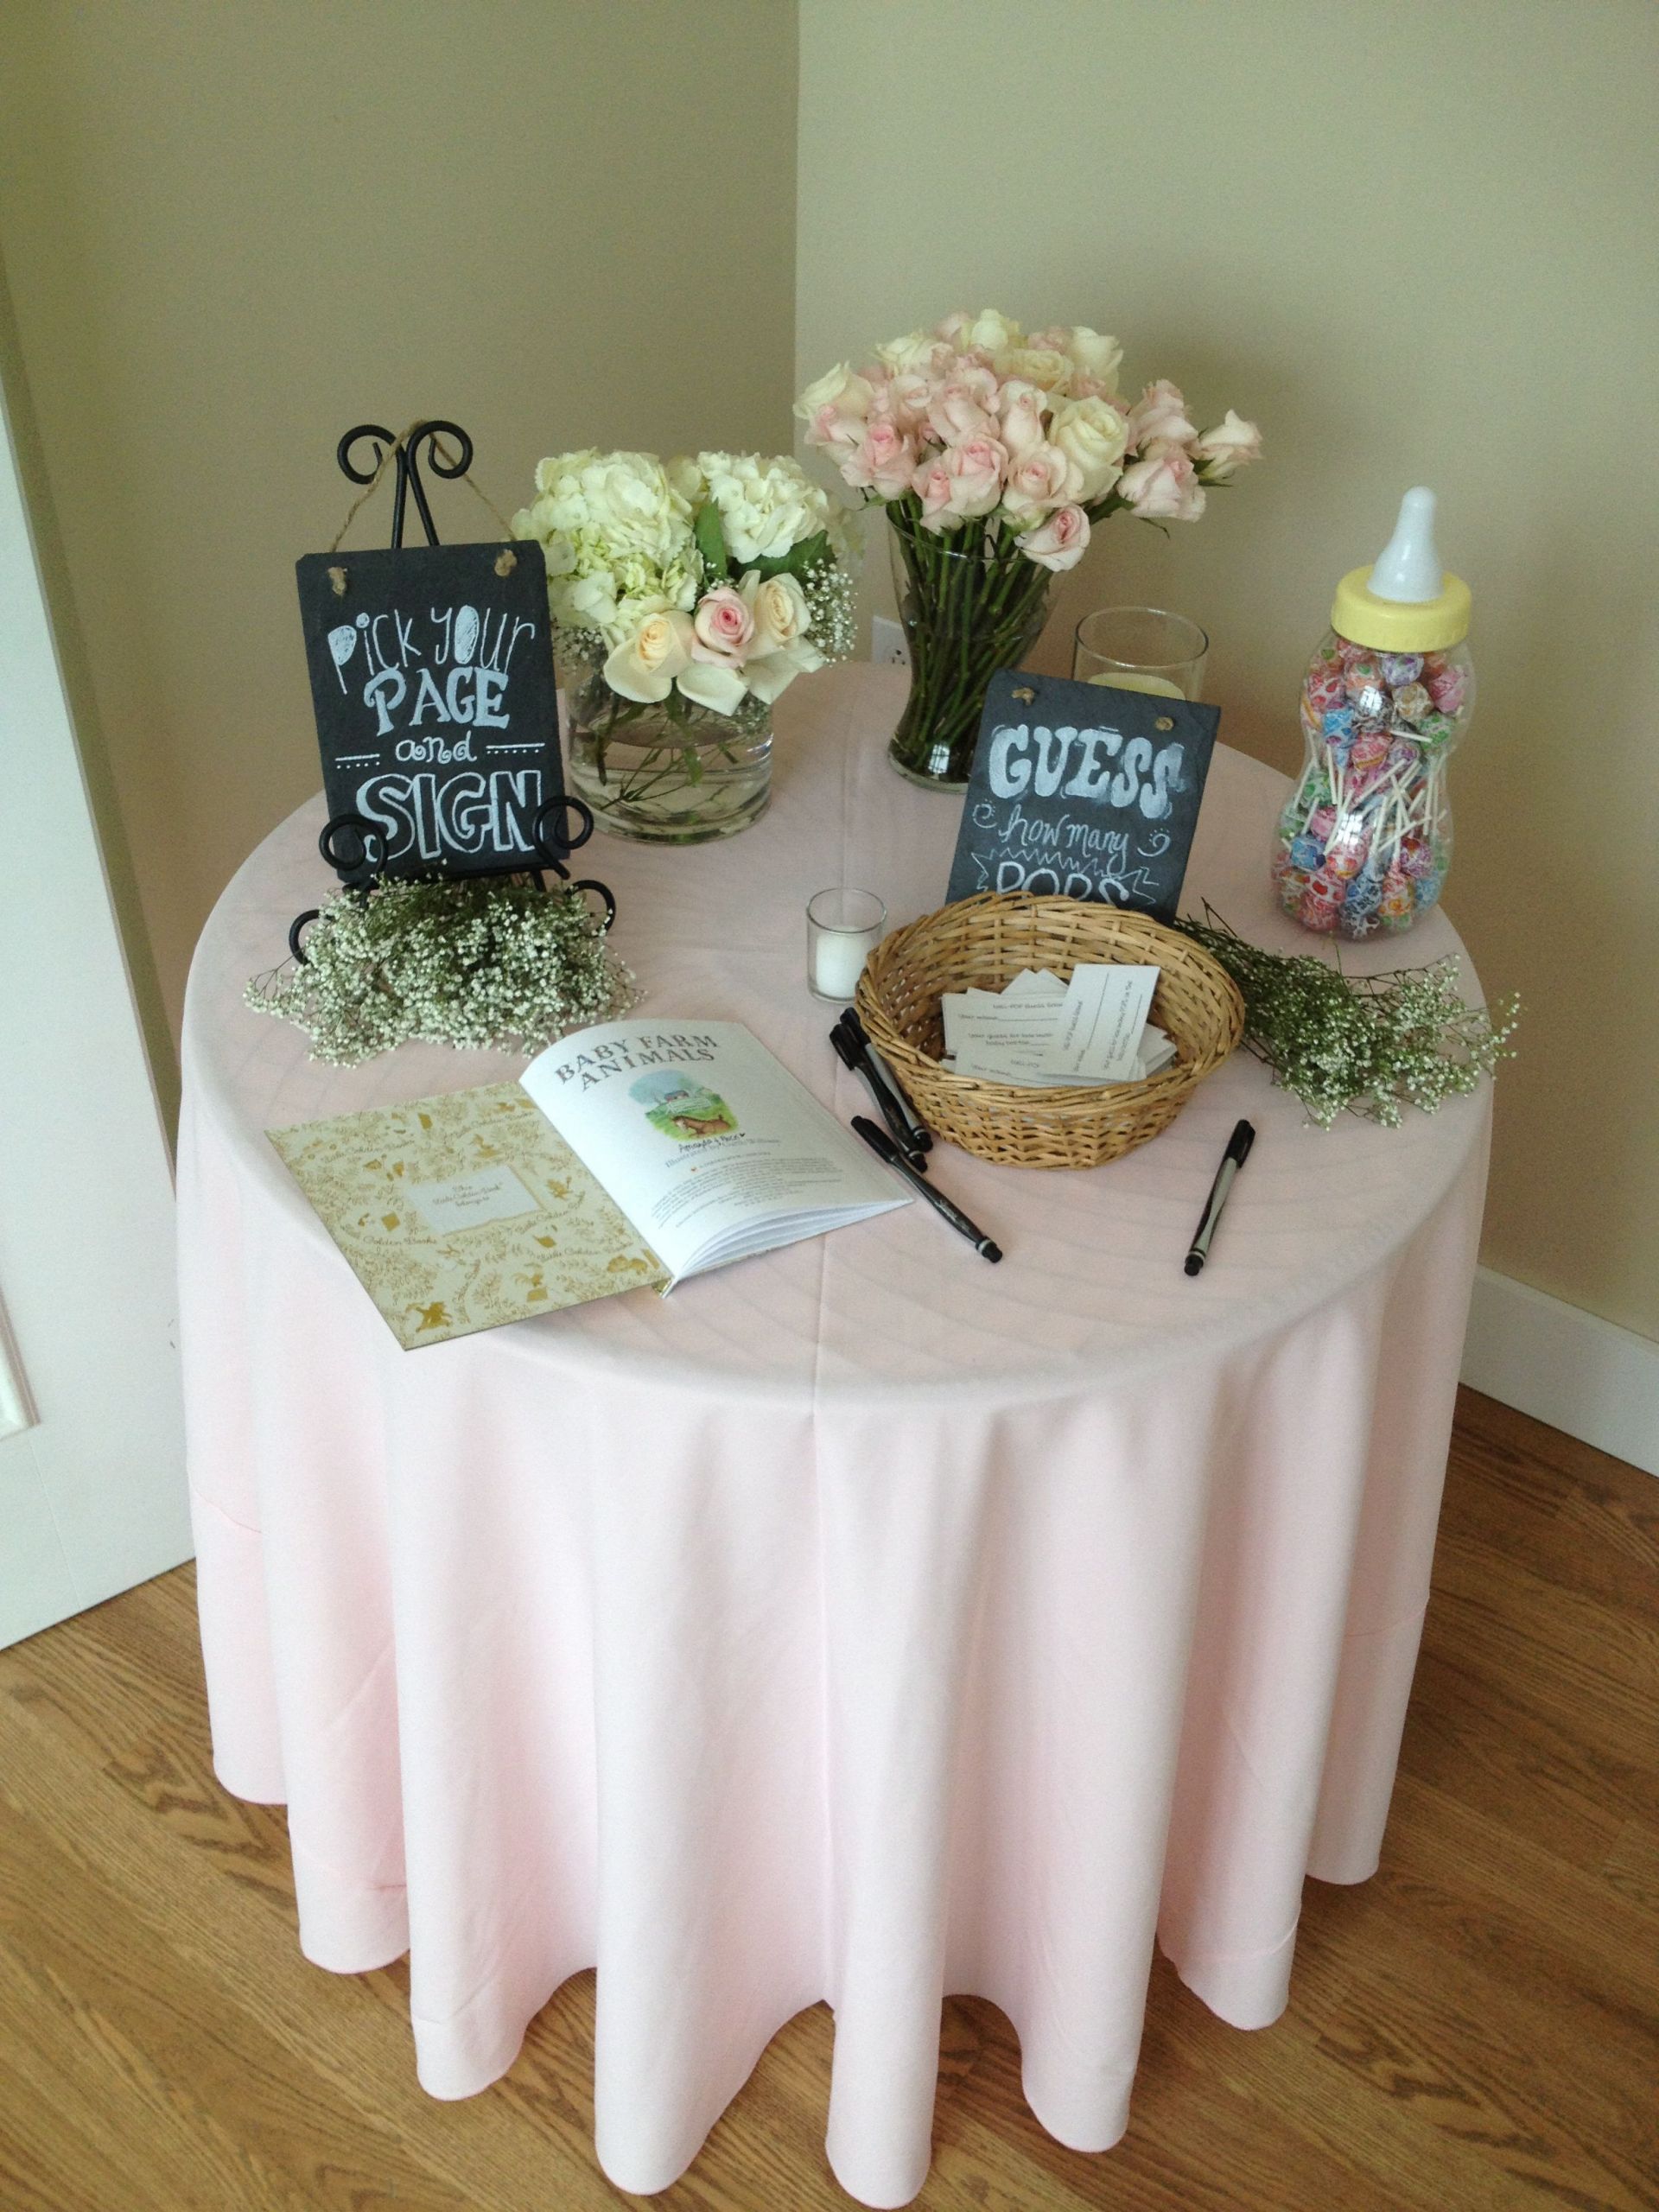 Gift Table Baby Shower Ideas
 Entrance Table at a baby shower